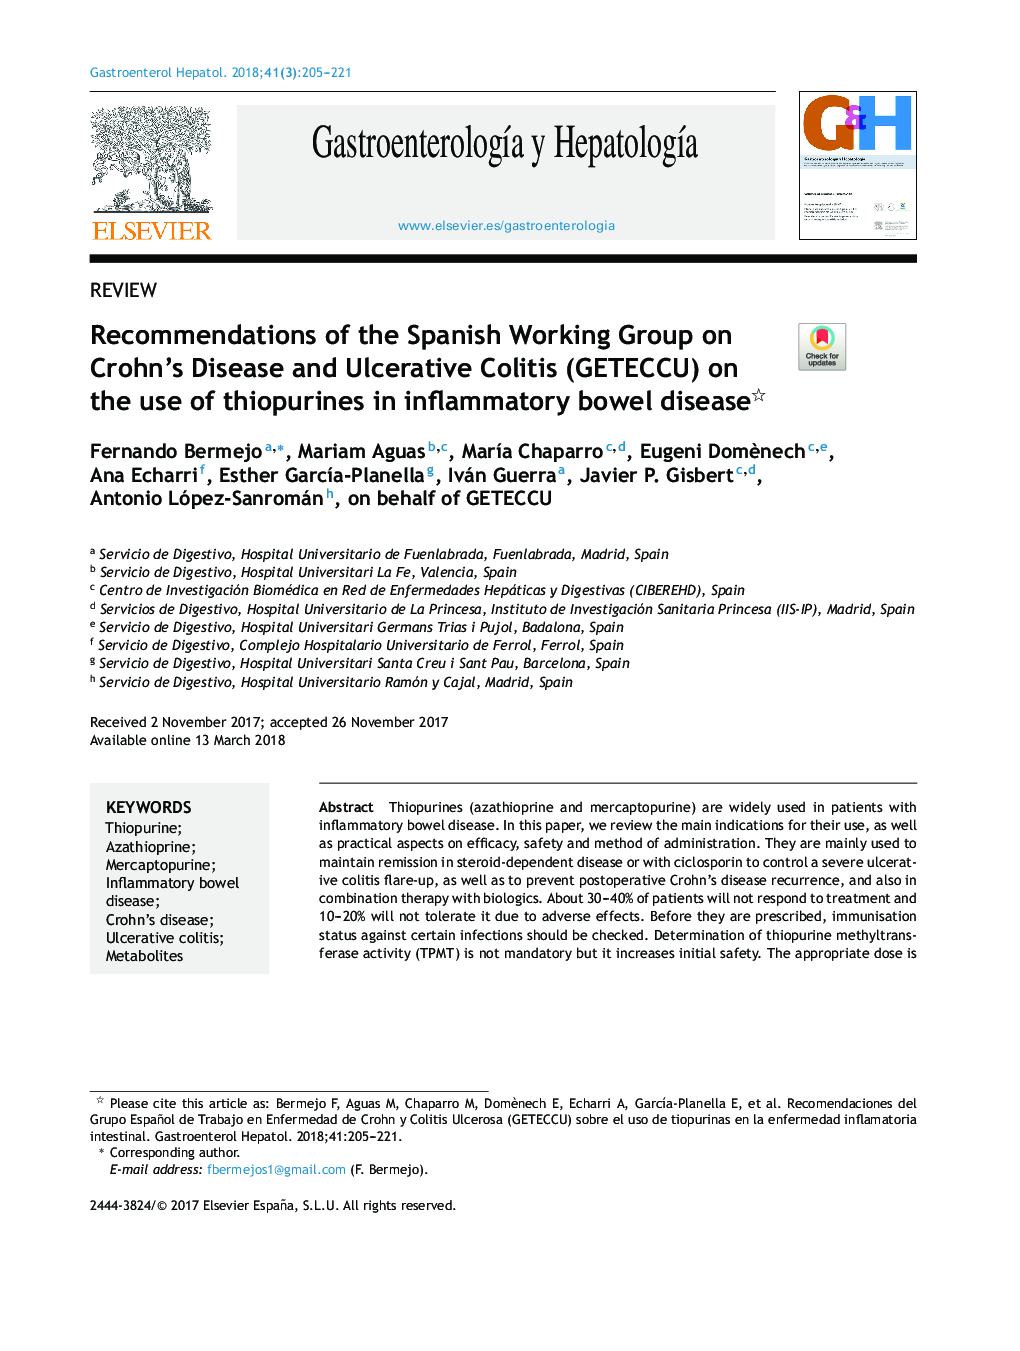 Recommendations of the Spanish Working Group on Crohn's Disease and Ulcerative Colitis (GETECCU) on the use of thiopurines in inflammatory bowel disease